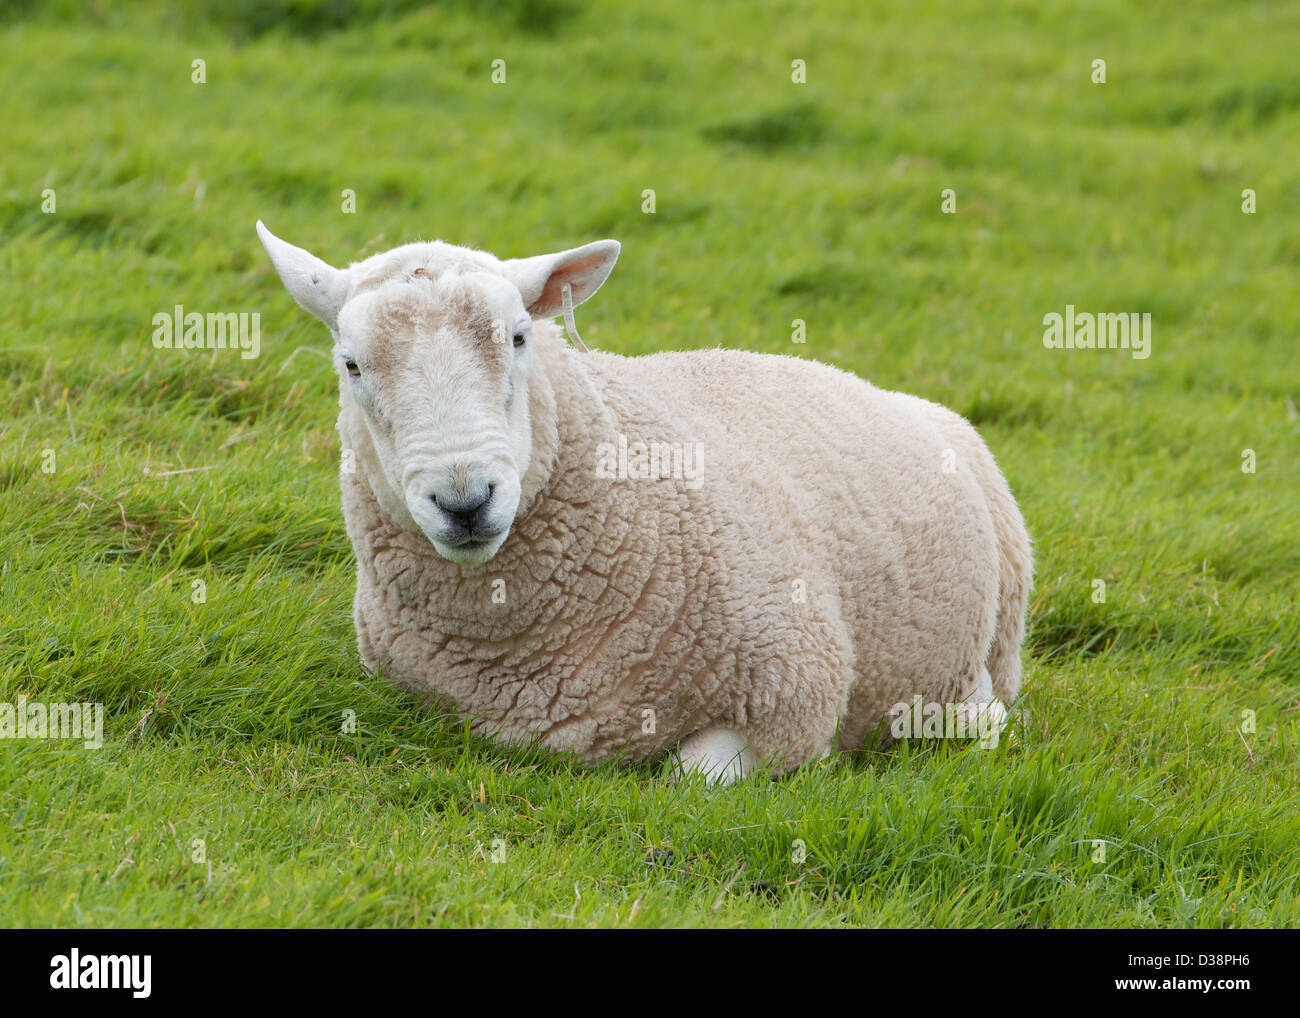 Sheep sitting in field Stock Photo